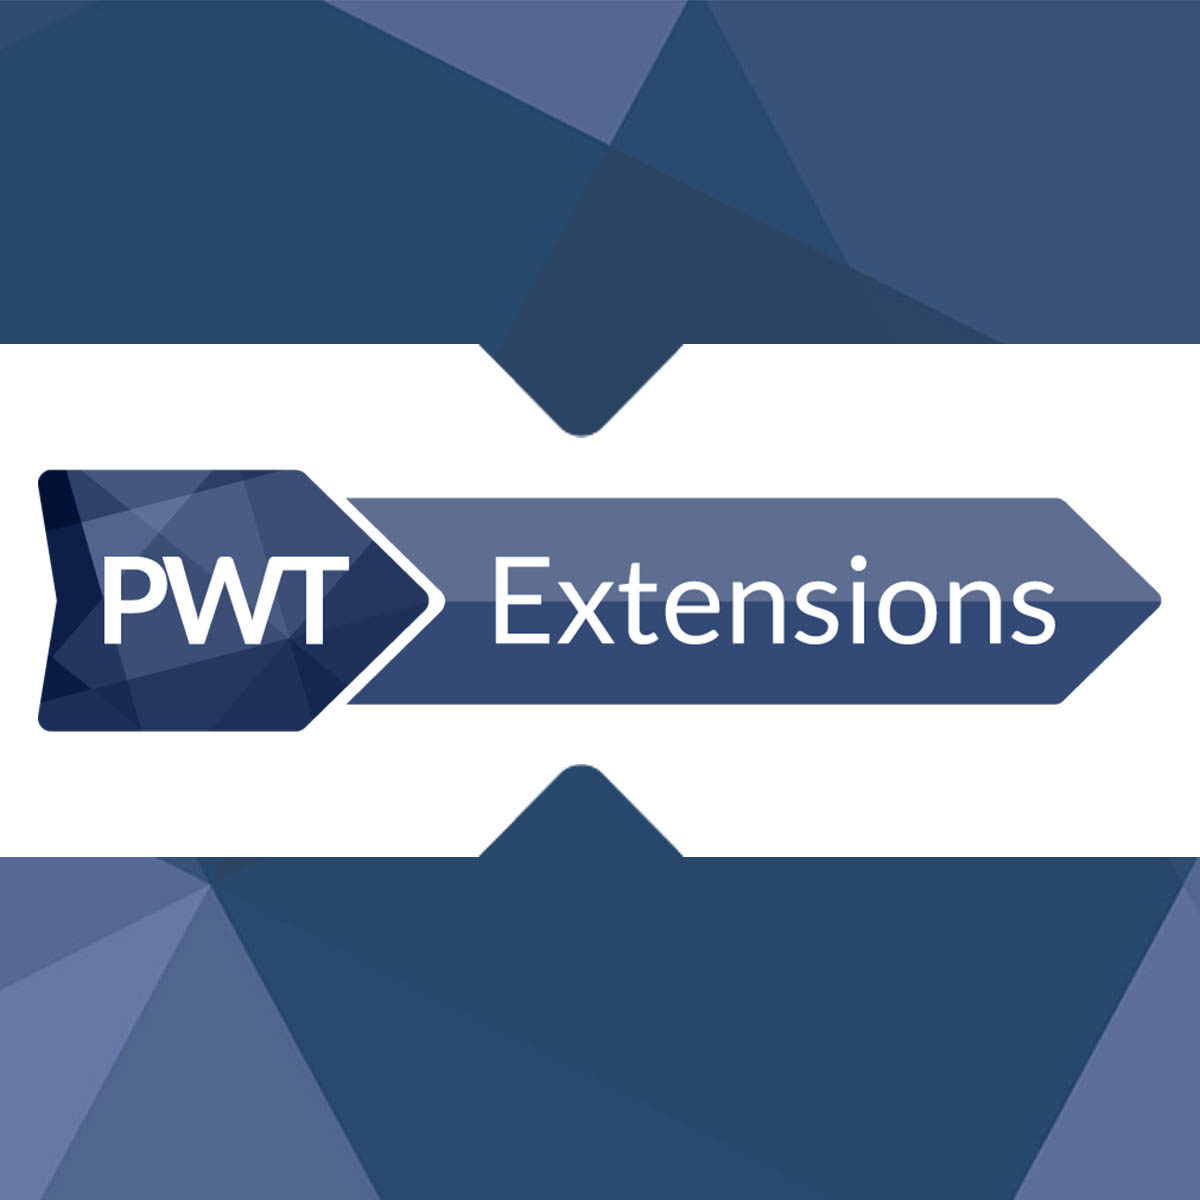 PWT Extensions